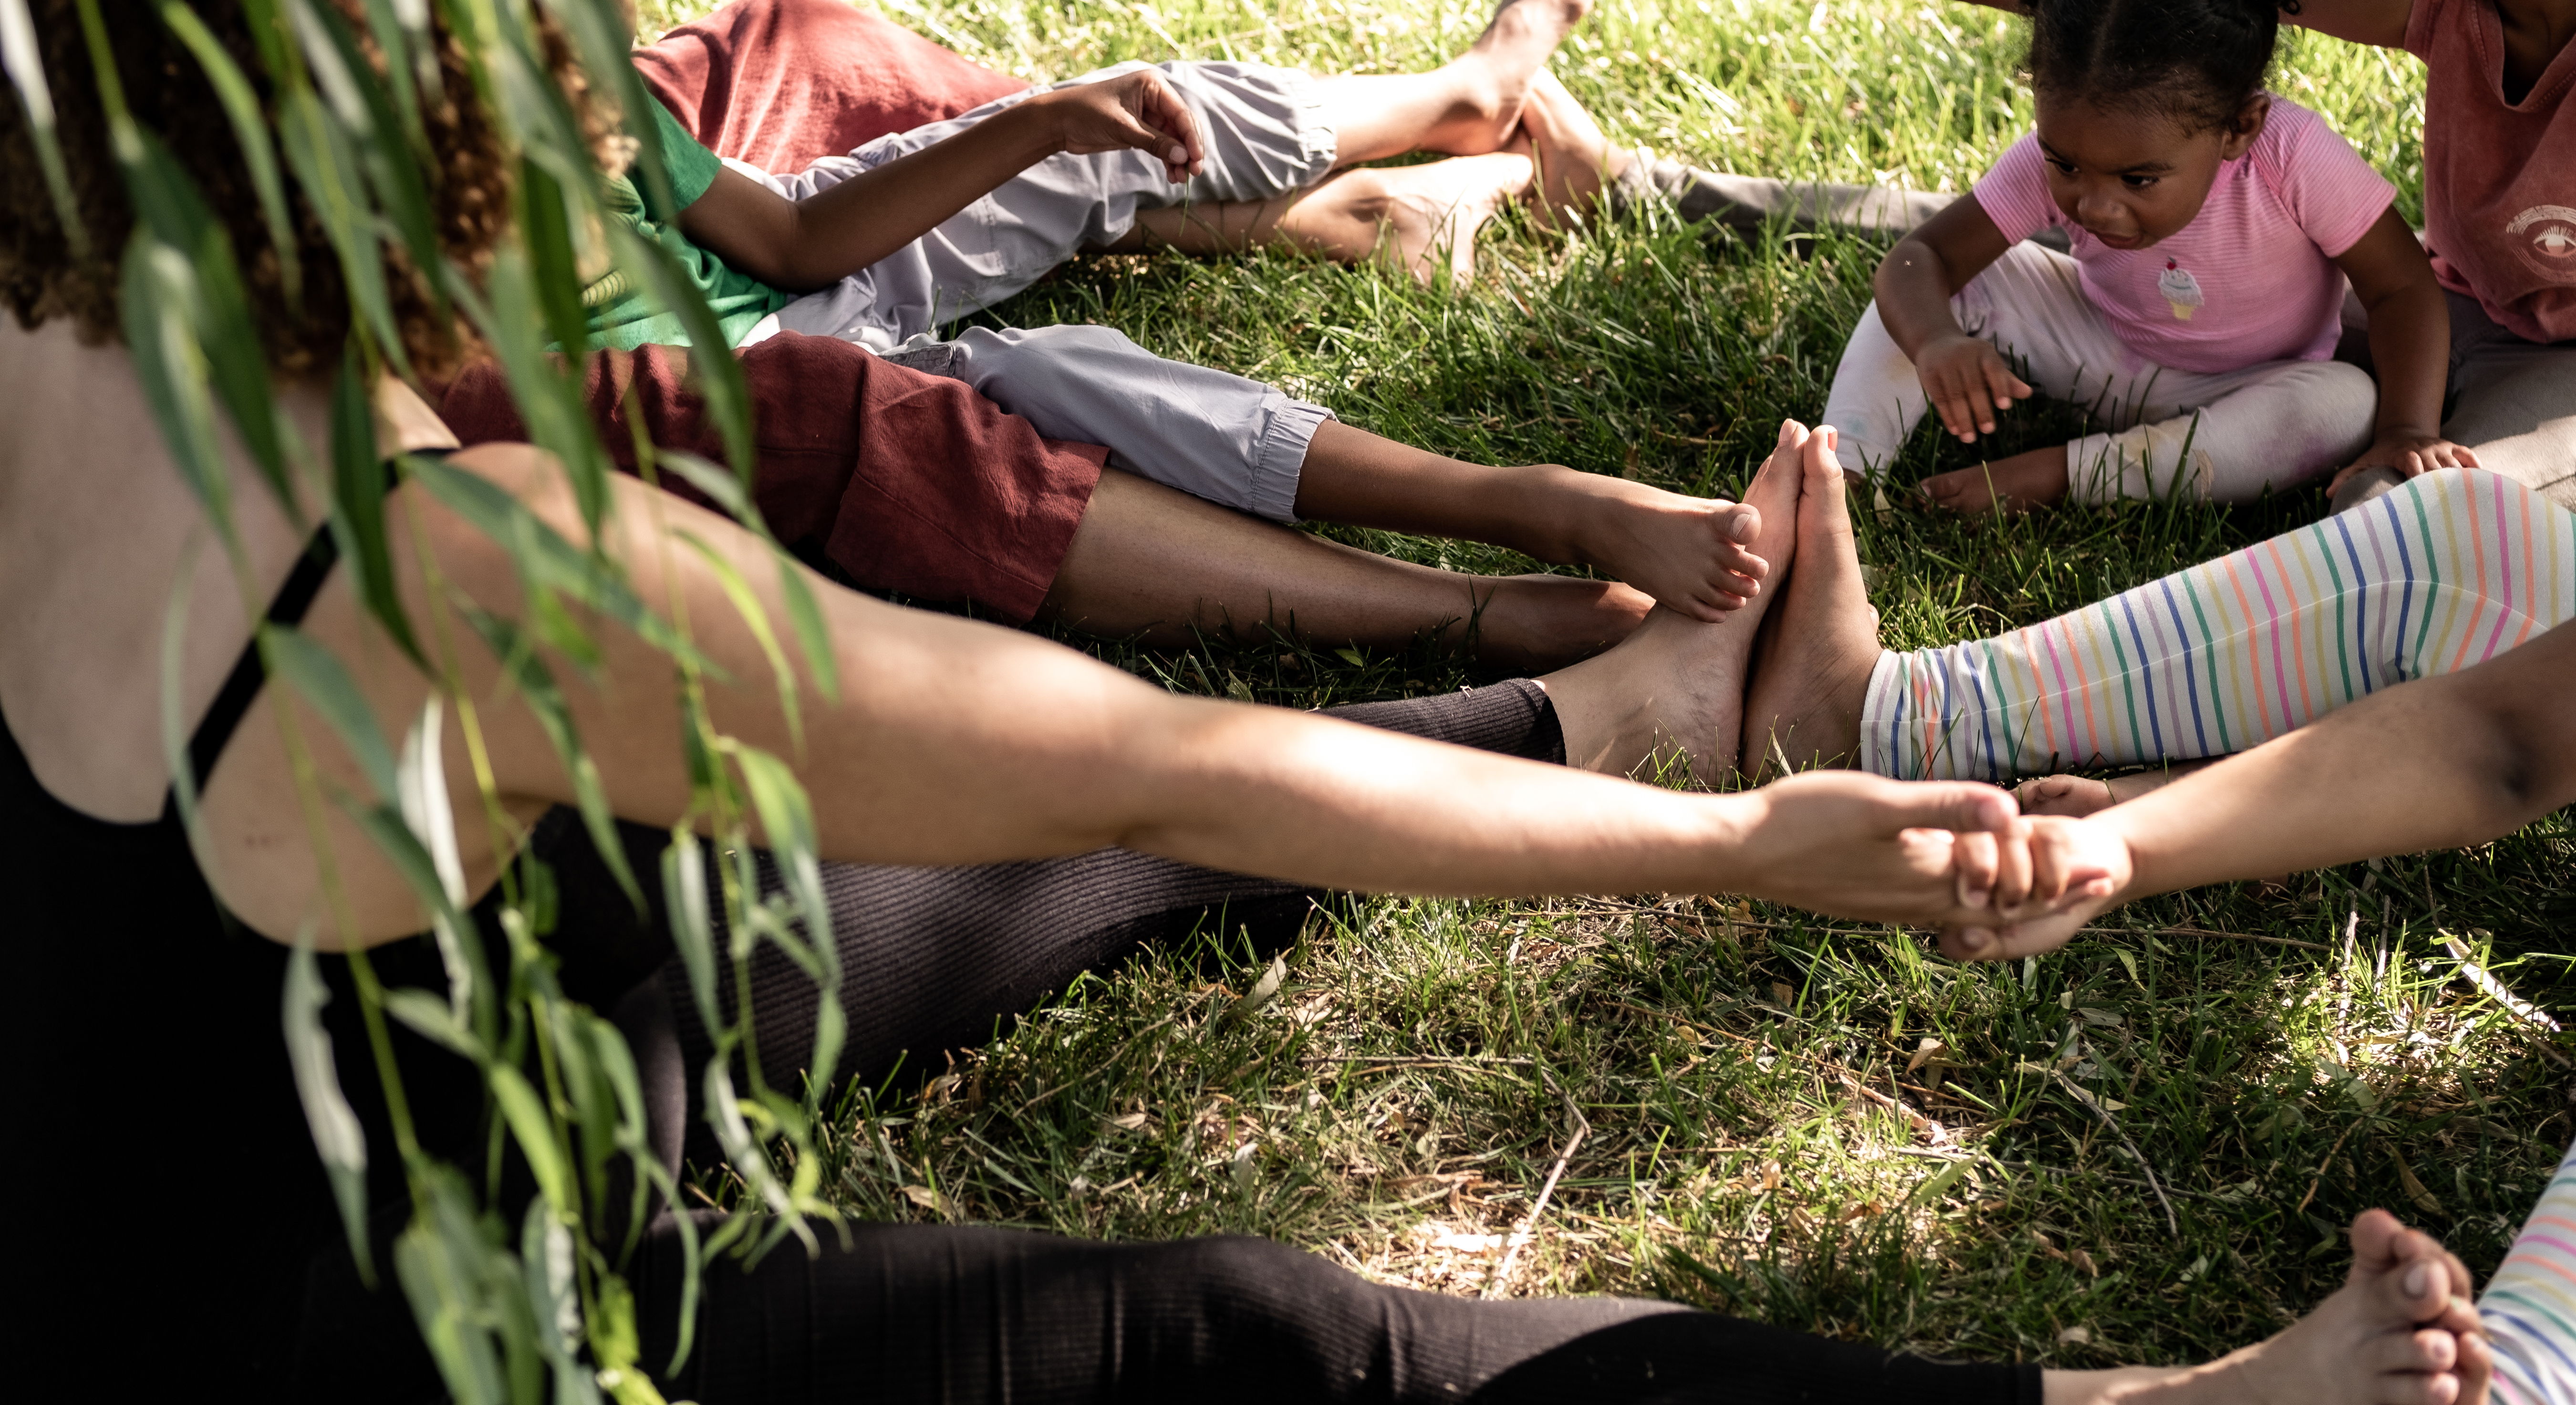 Group of children and adults sitting in grass with legs and arms outstretched. Two people are holding hands.